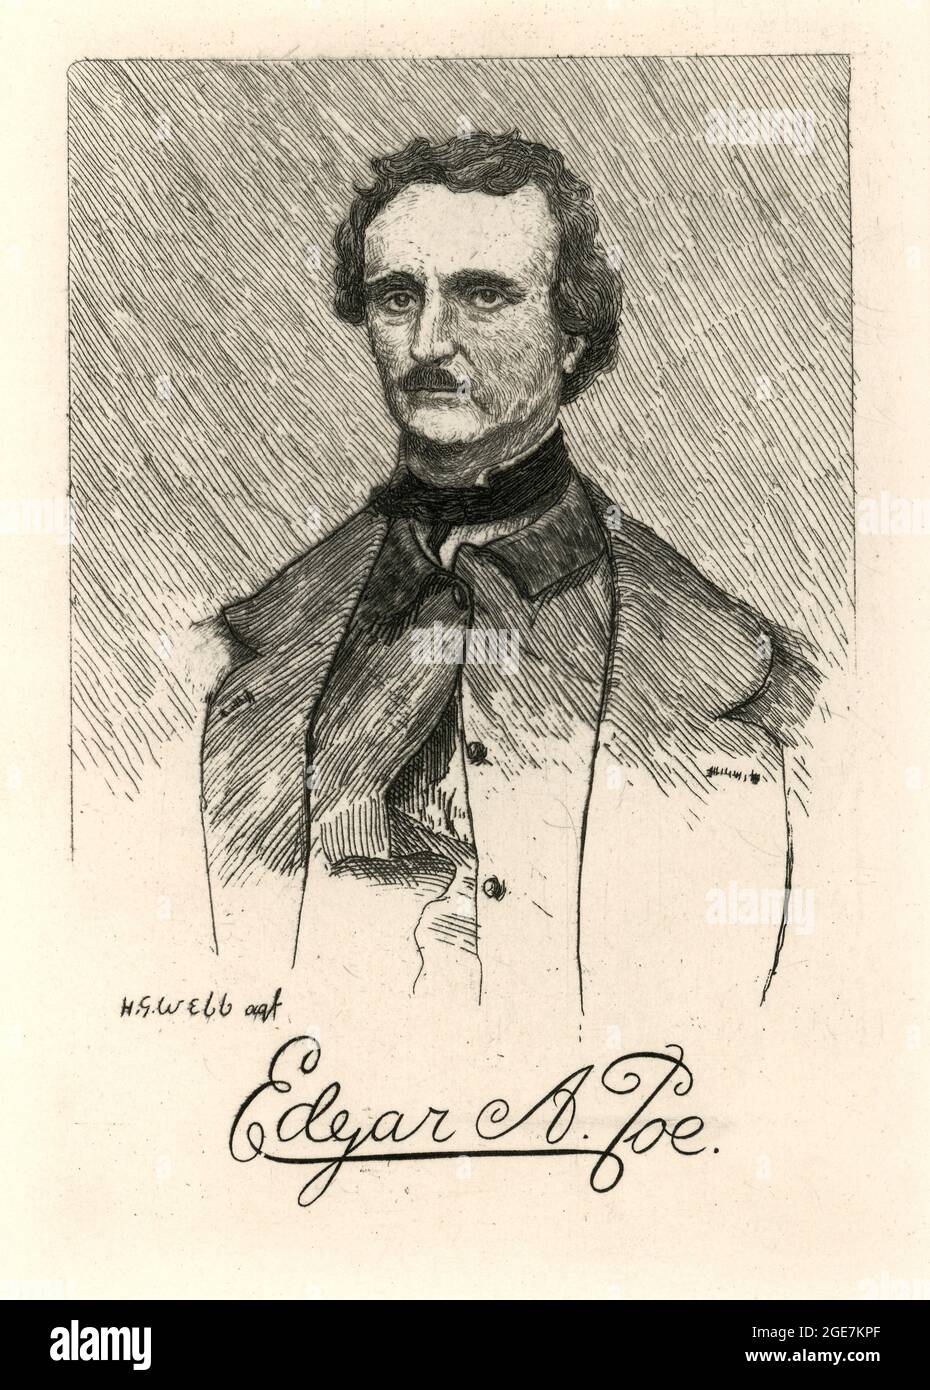 Vintage portrait of Edgar Allan Poe an American writer, poet, editor, and literary critic 19th Century Stock Photo